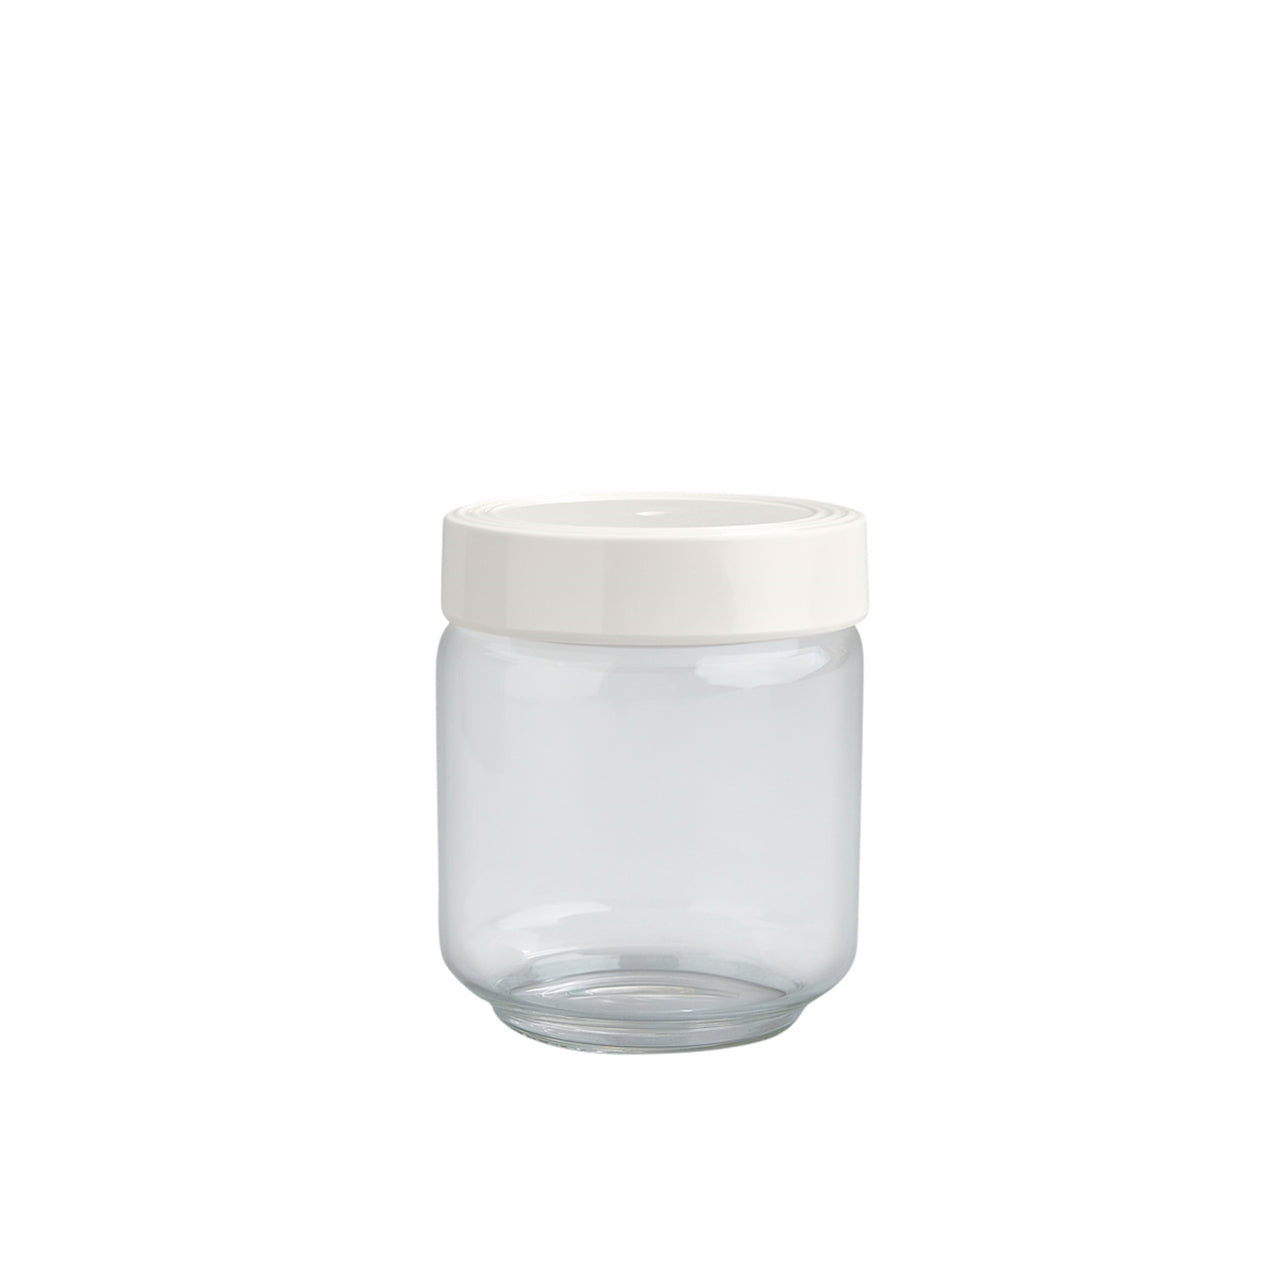 C9B Medium Canister by Nora Fleming. 3.5" x 4.5" glass canister features pinstripe melamine lid. Shop at The Painted Cottage a Maryland Boutique